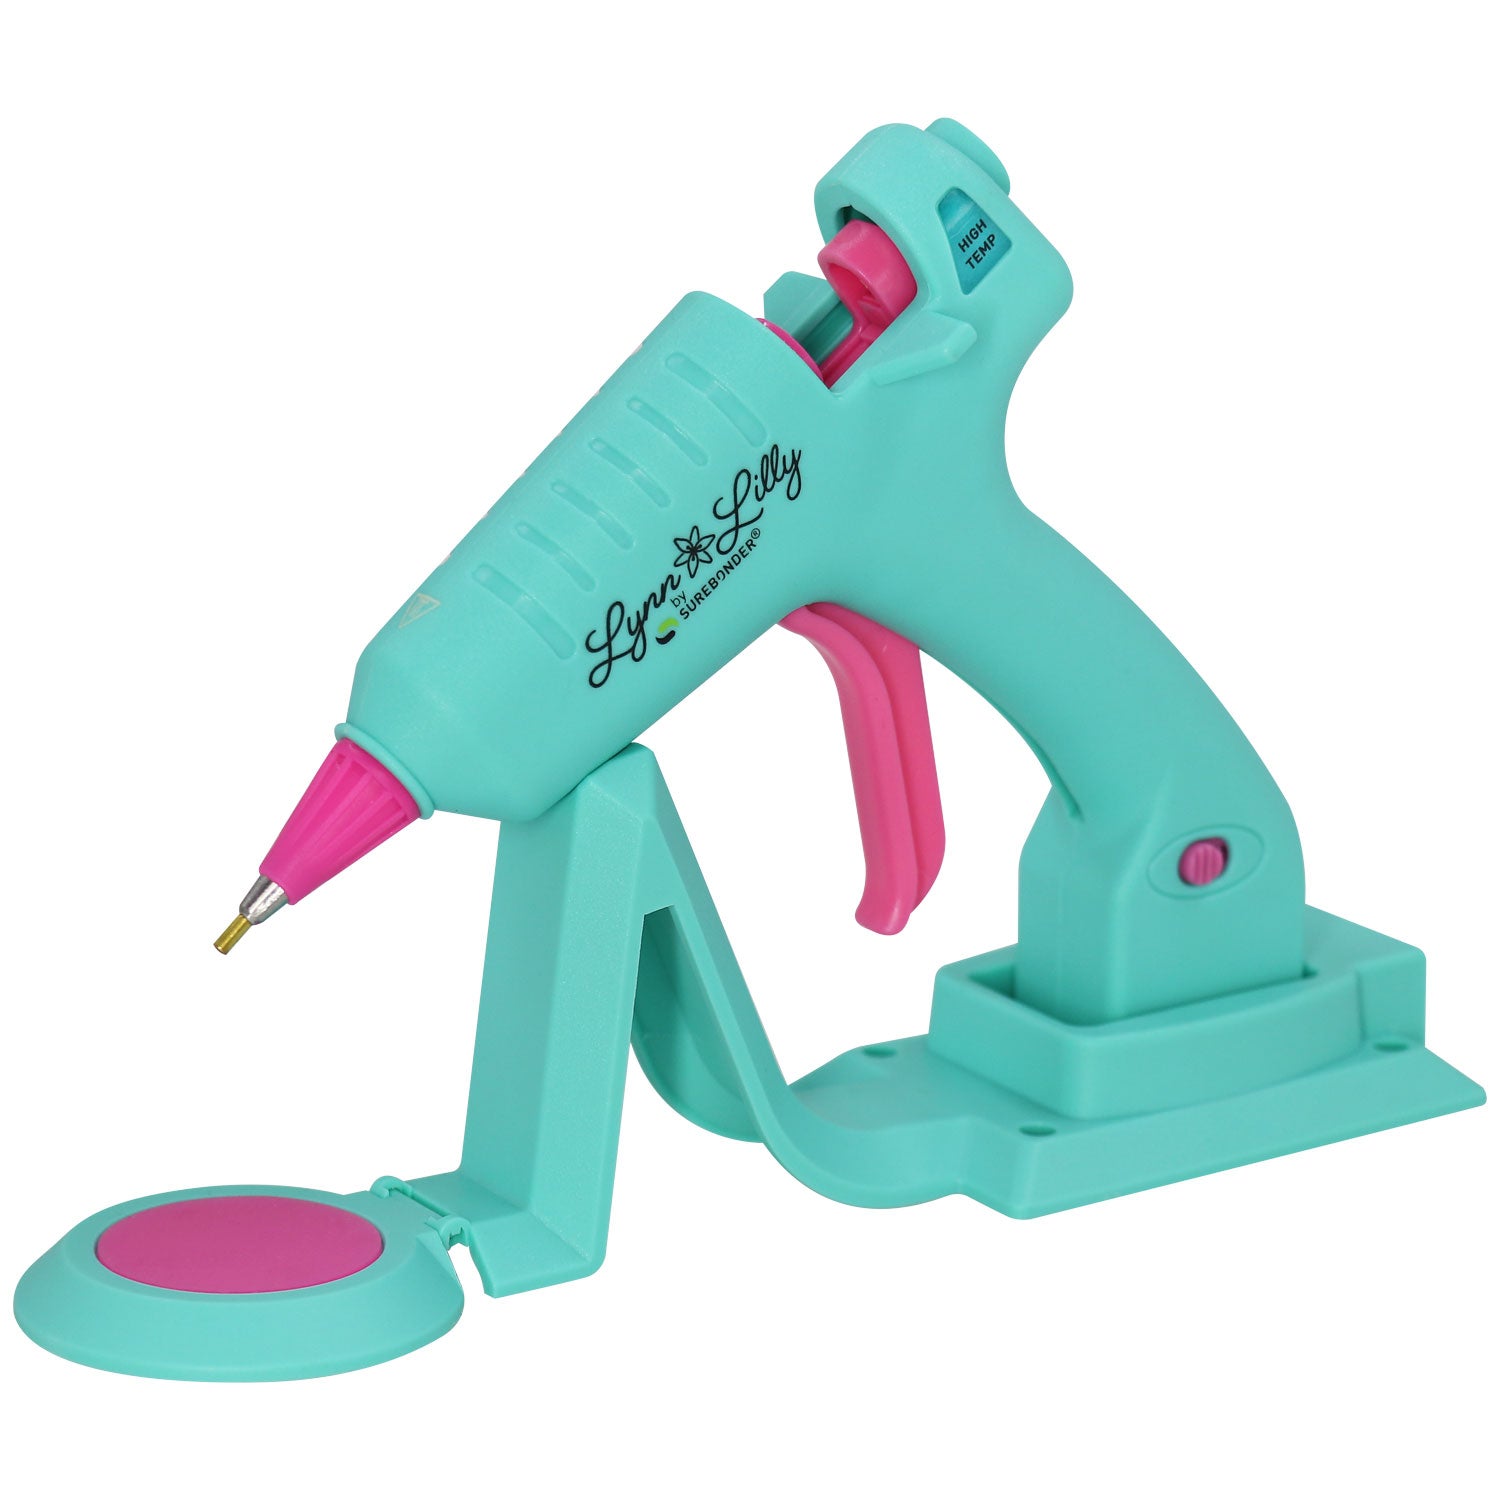 Lynn Lilly Special Edition Cordless/Corded Full Size Hot Glue Gun